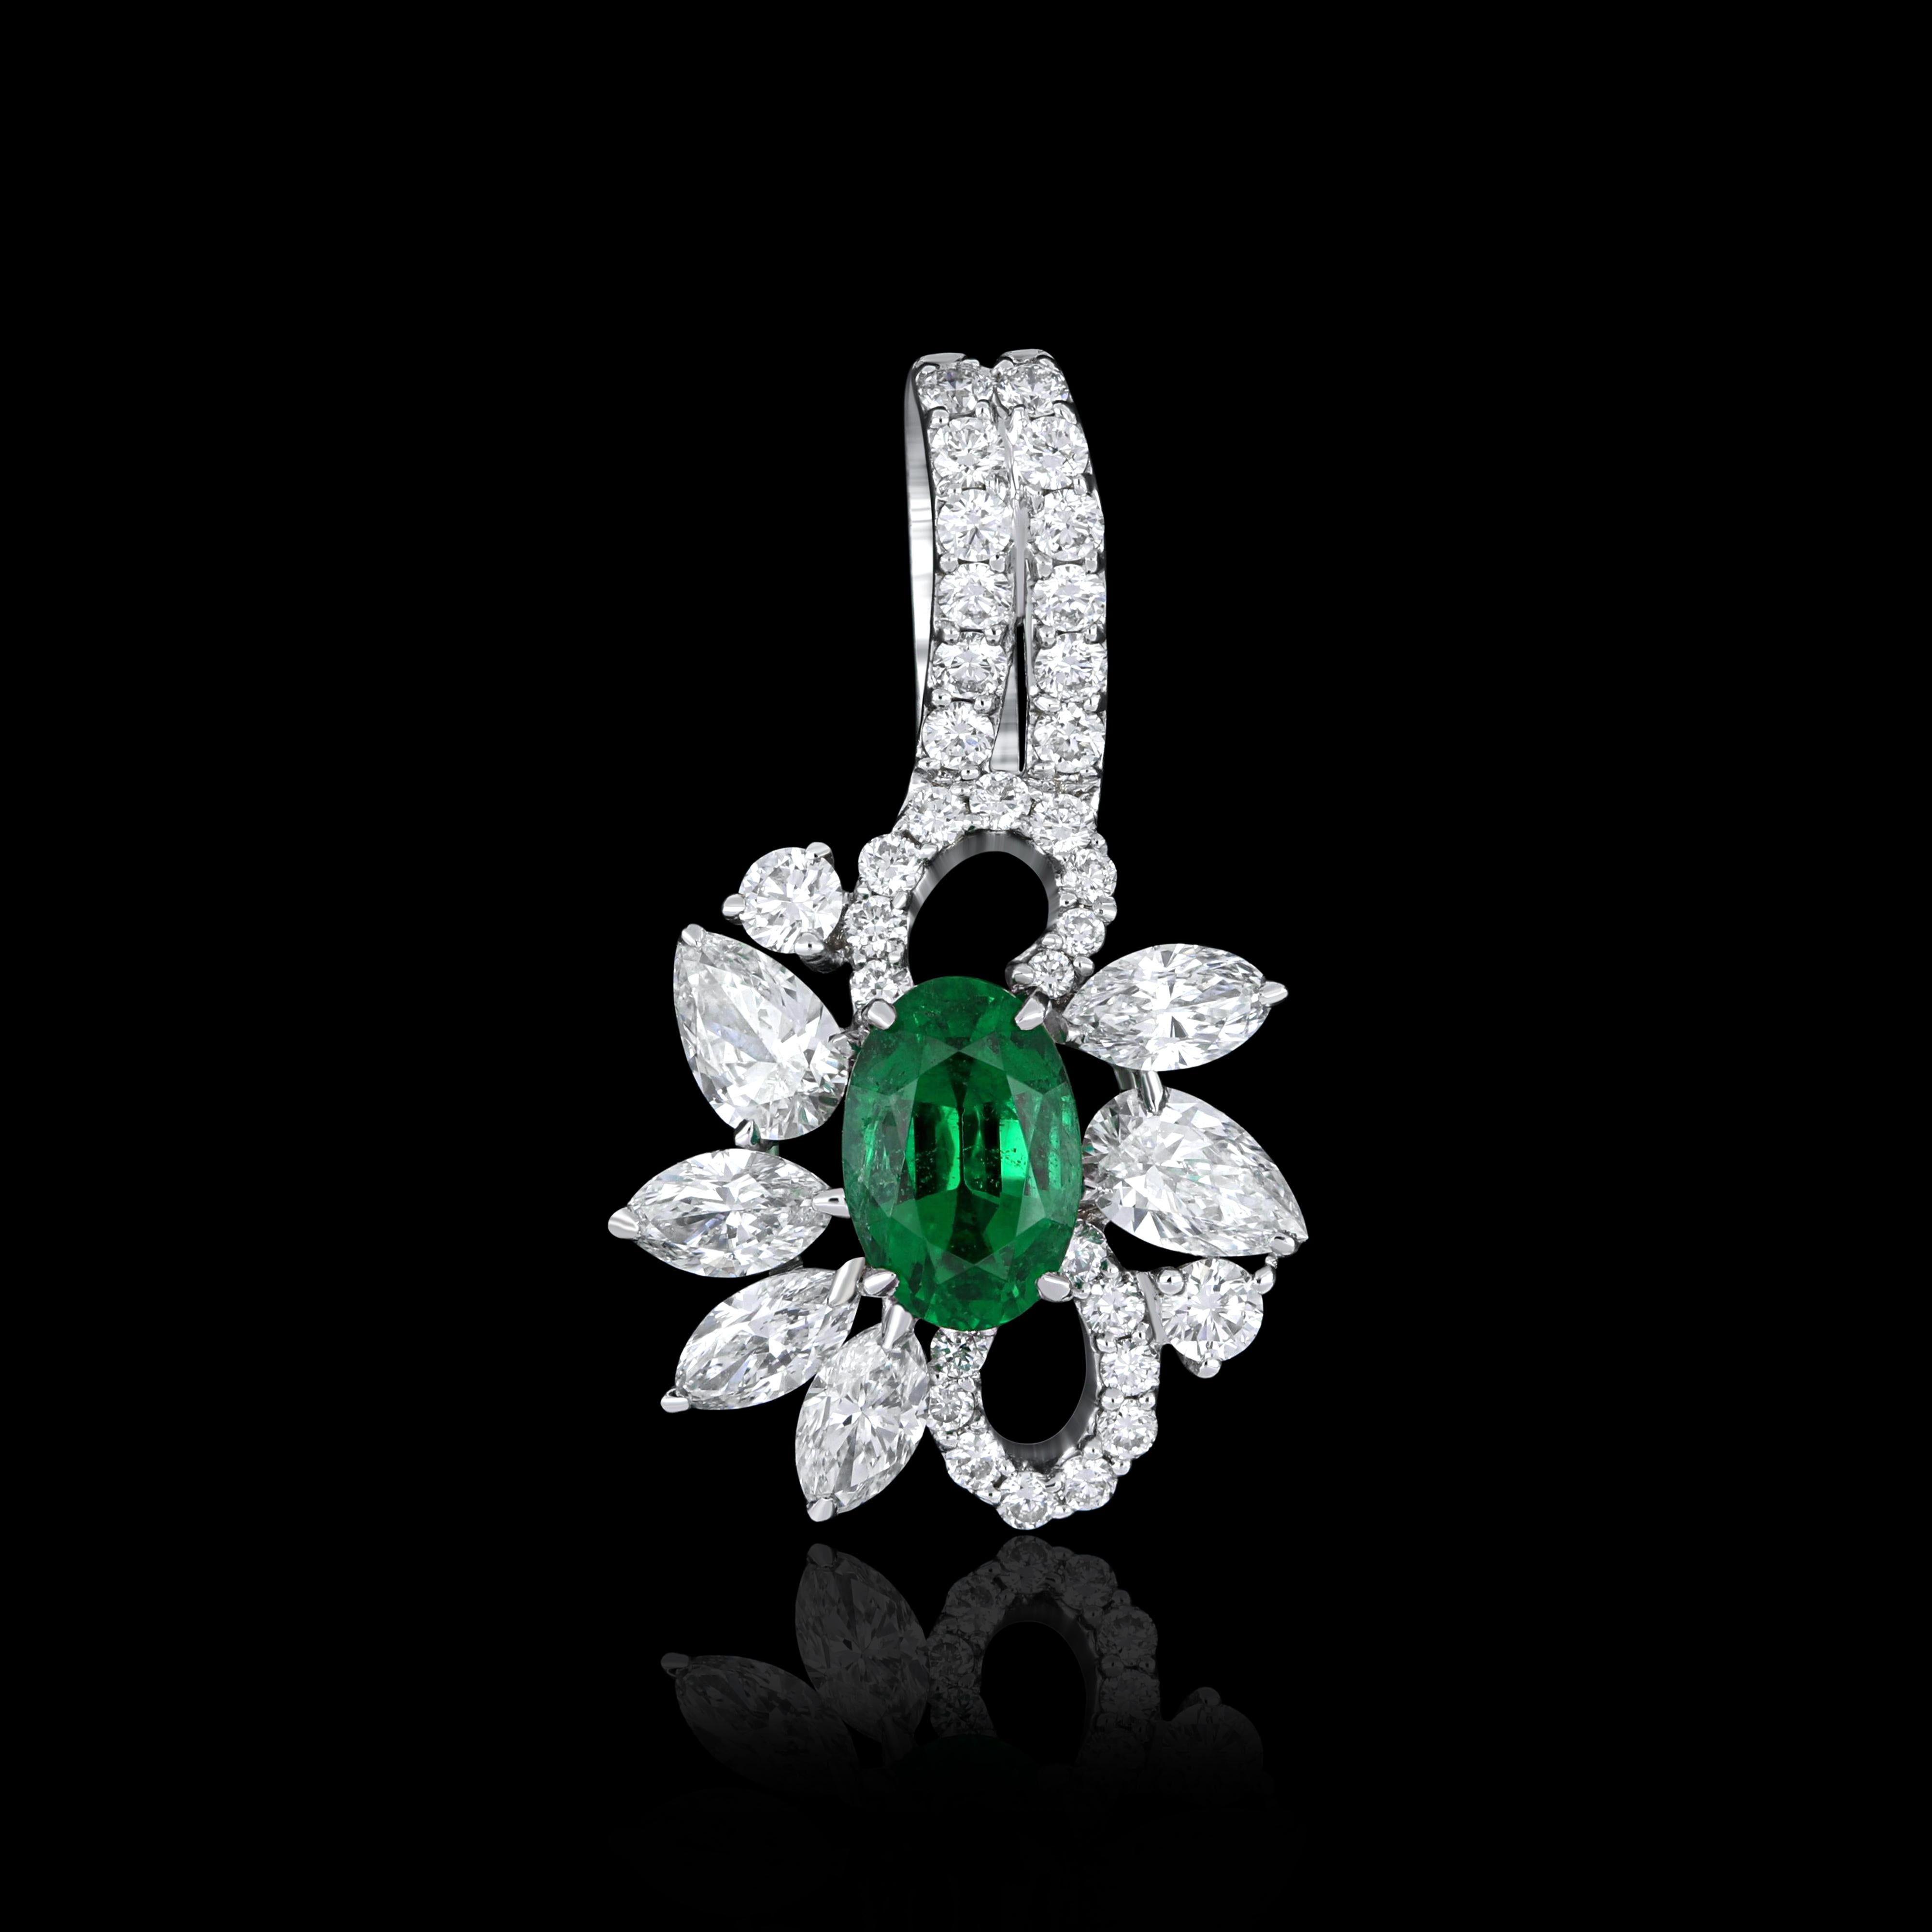 Elegant and exquisitely detailed 18 Karat White Gold Pendant, center set with 0.45Cts .Oval Shape Emerald and micro pave set Diamonds, weighing approx. 0.70Cts Beautifully Hand crafted in 18 Karat White Gold. 

Stone Detail:
Emerald: 6x4MM

Stone